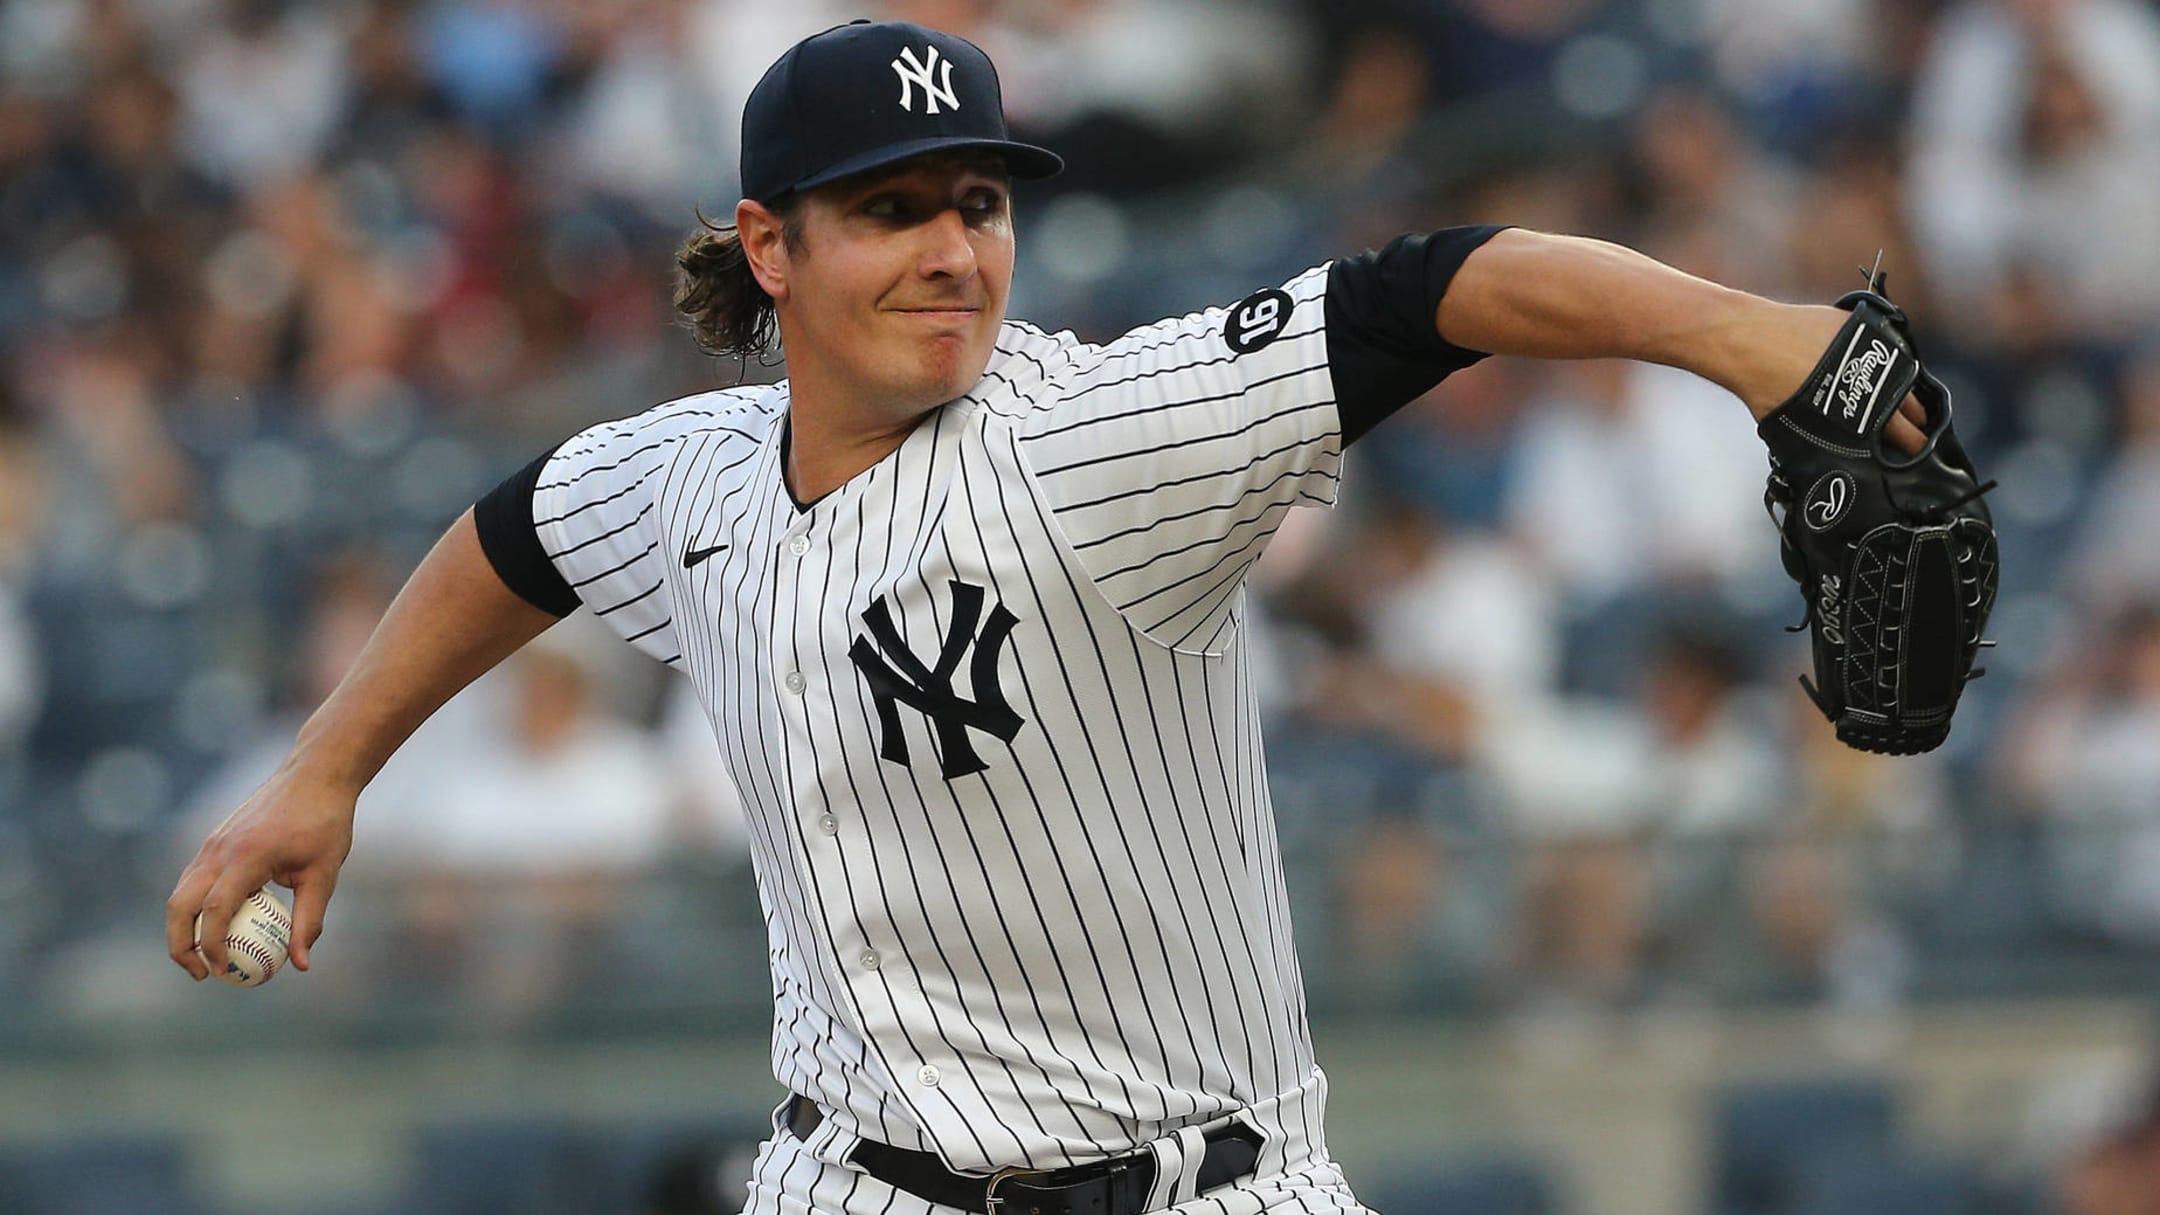 Yankees announce minor-league deal for former Reds pitcher Sal Romano